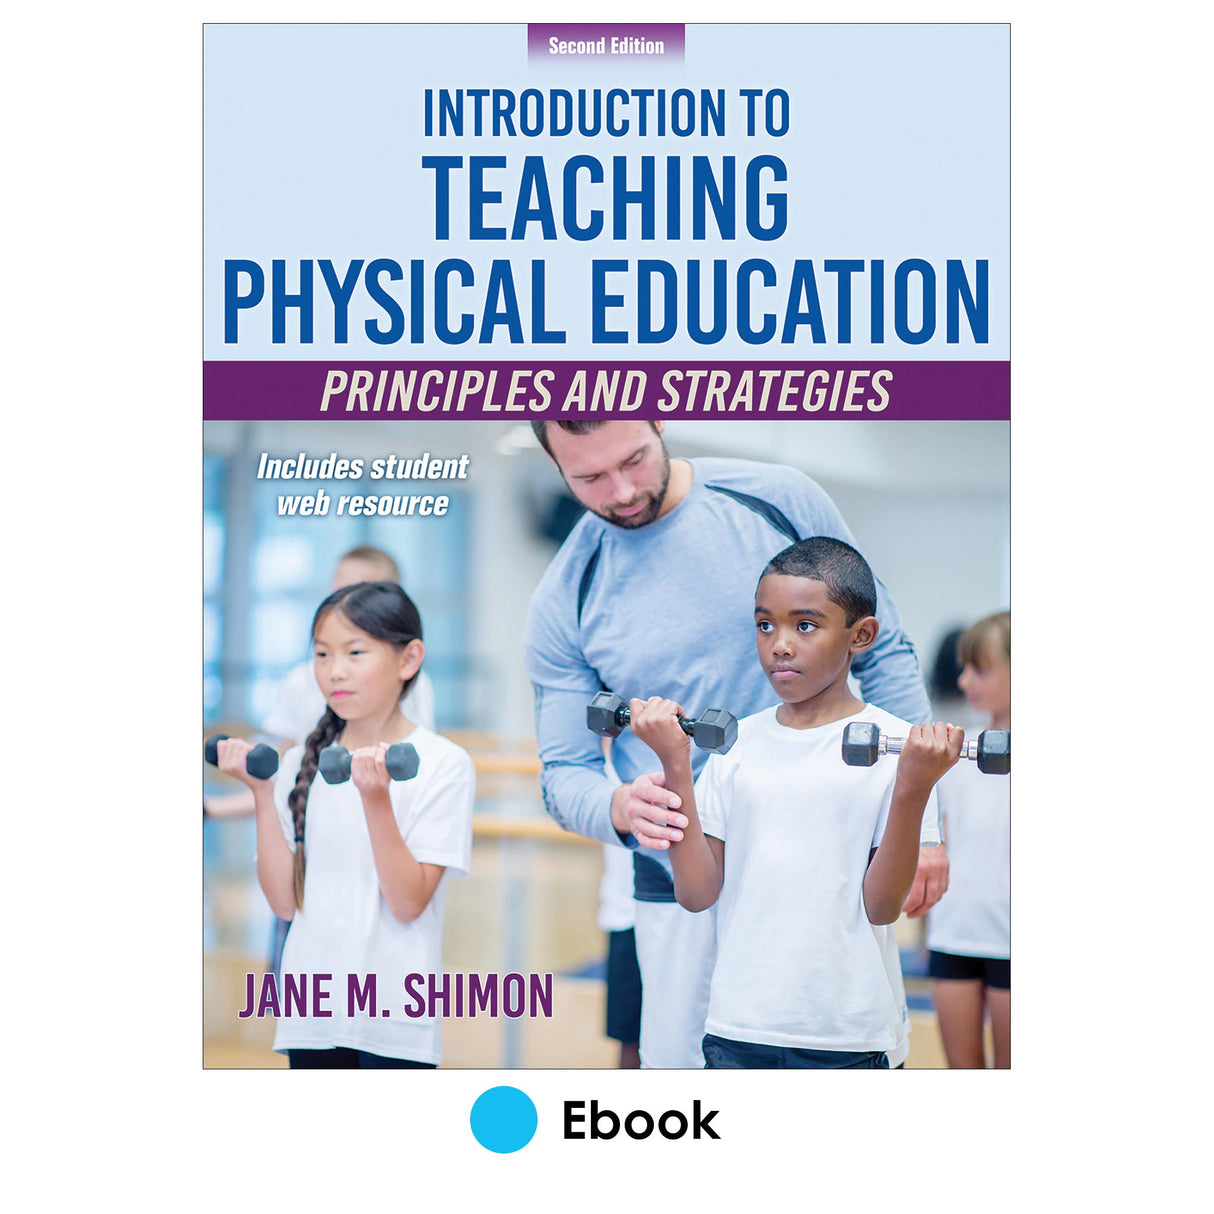 Introduction to Teaching Physical Education 2nd Edition epub With Web Resource